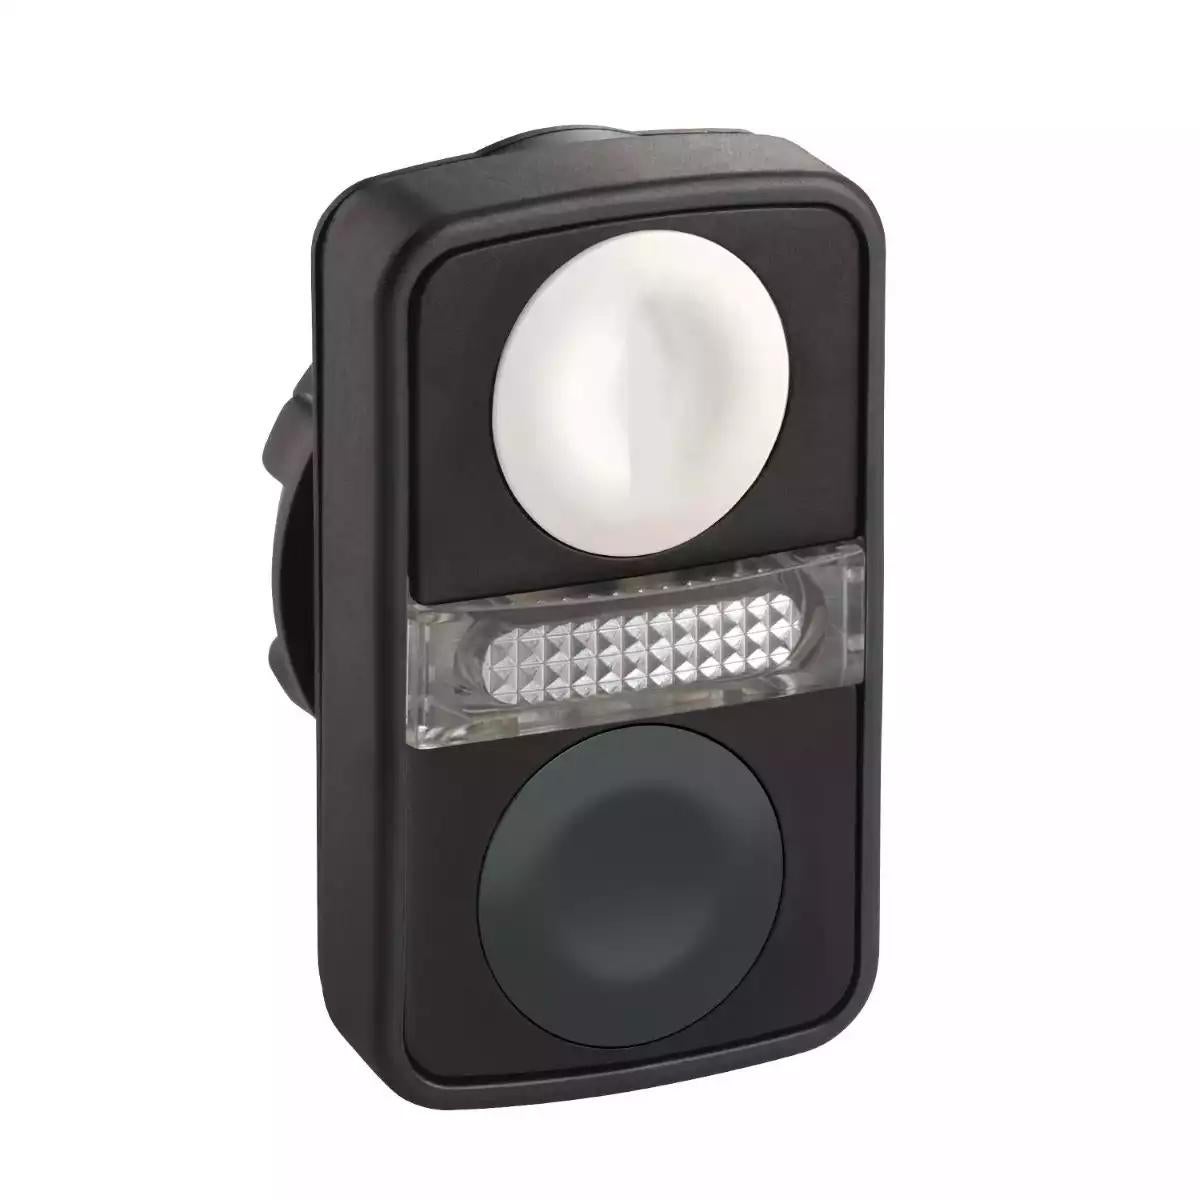 Head for illuminated double headed push button, Harmony XB5, 2 white/black flush, 22mm, 1 central pilot light, unmarked